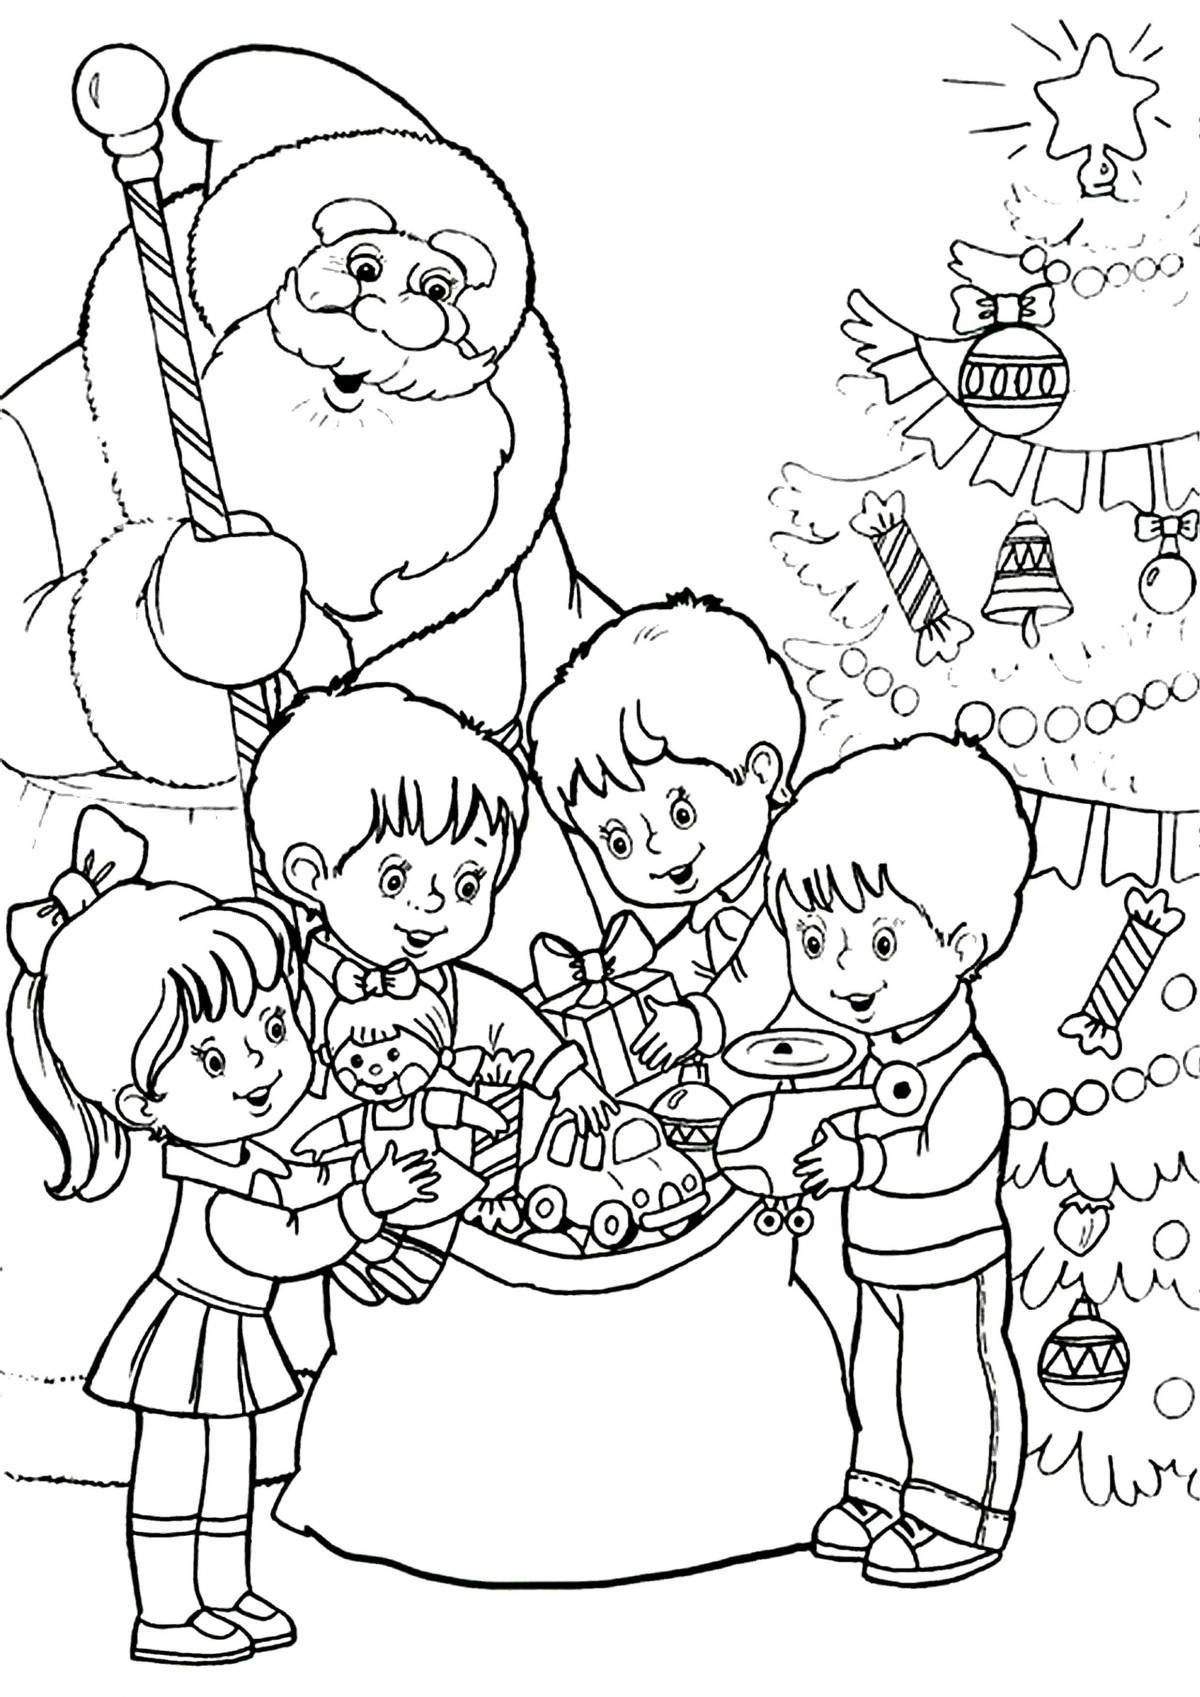 Large Christmas coloring book for kids